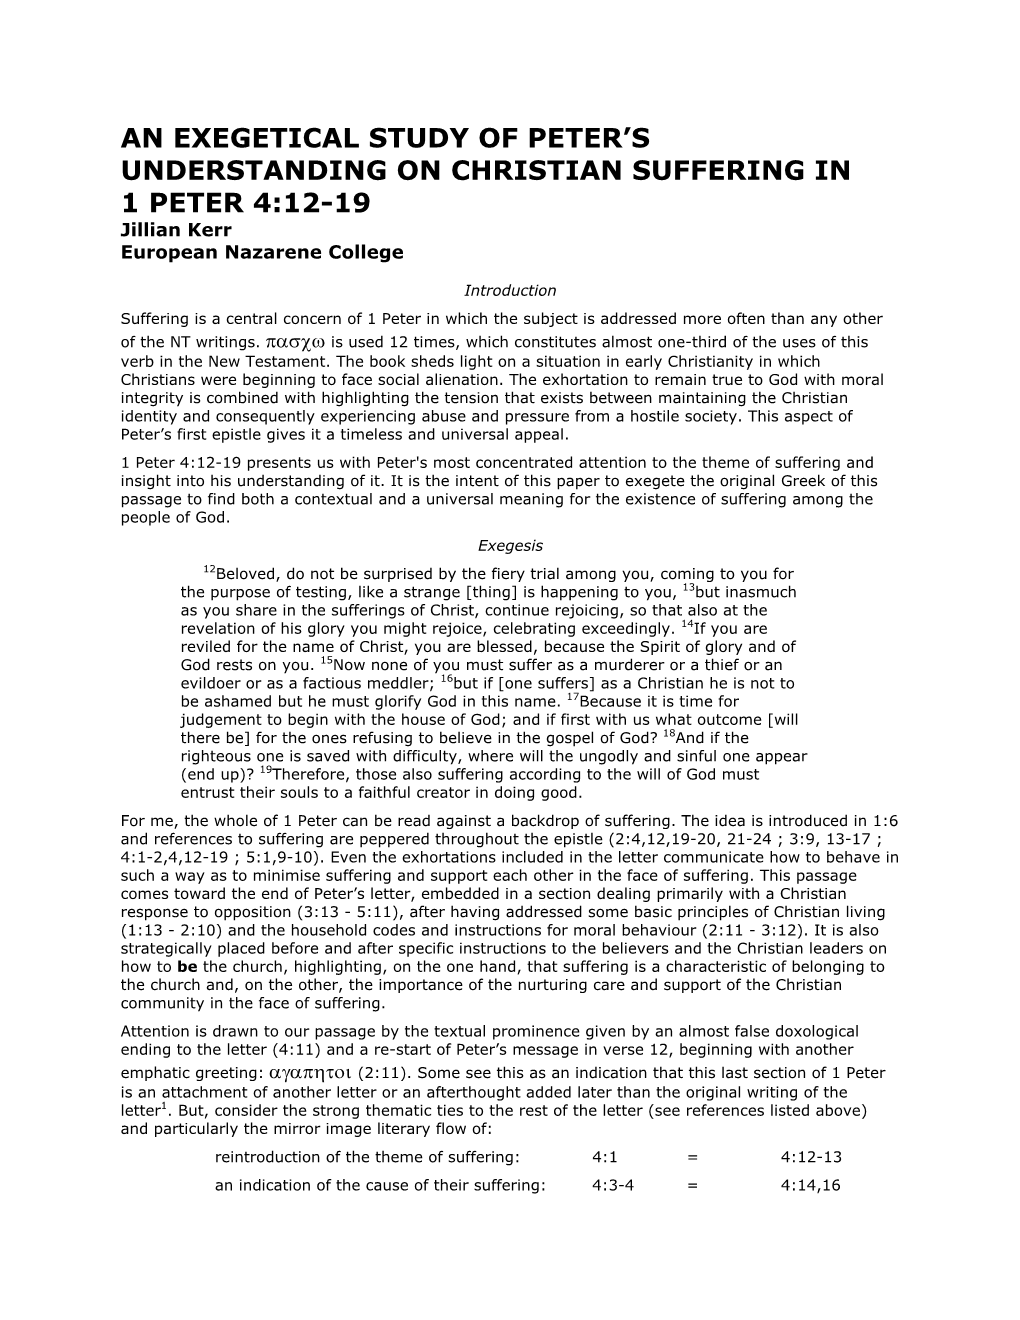 An Exegetical Study of Peter's Understanding on Christian